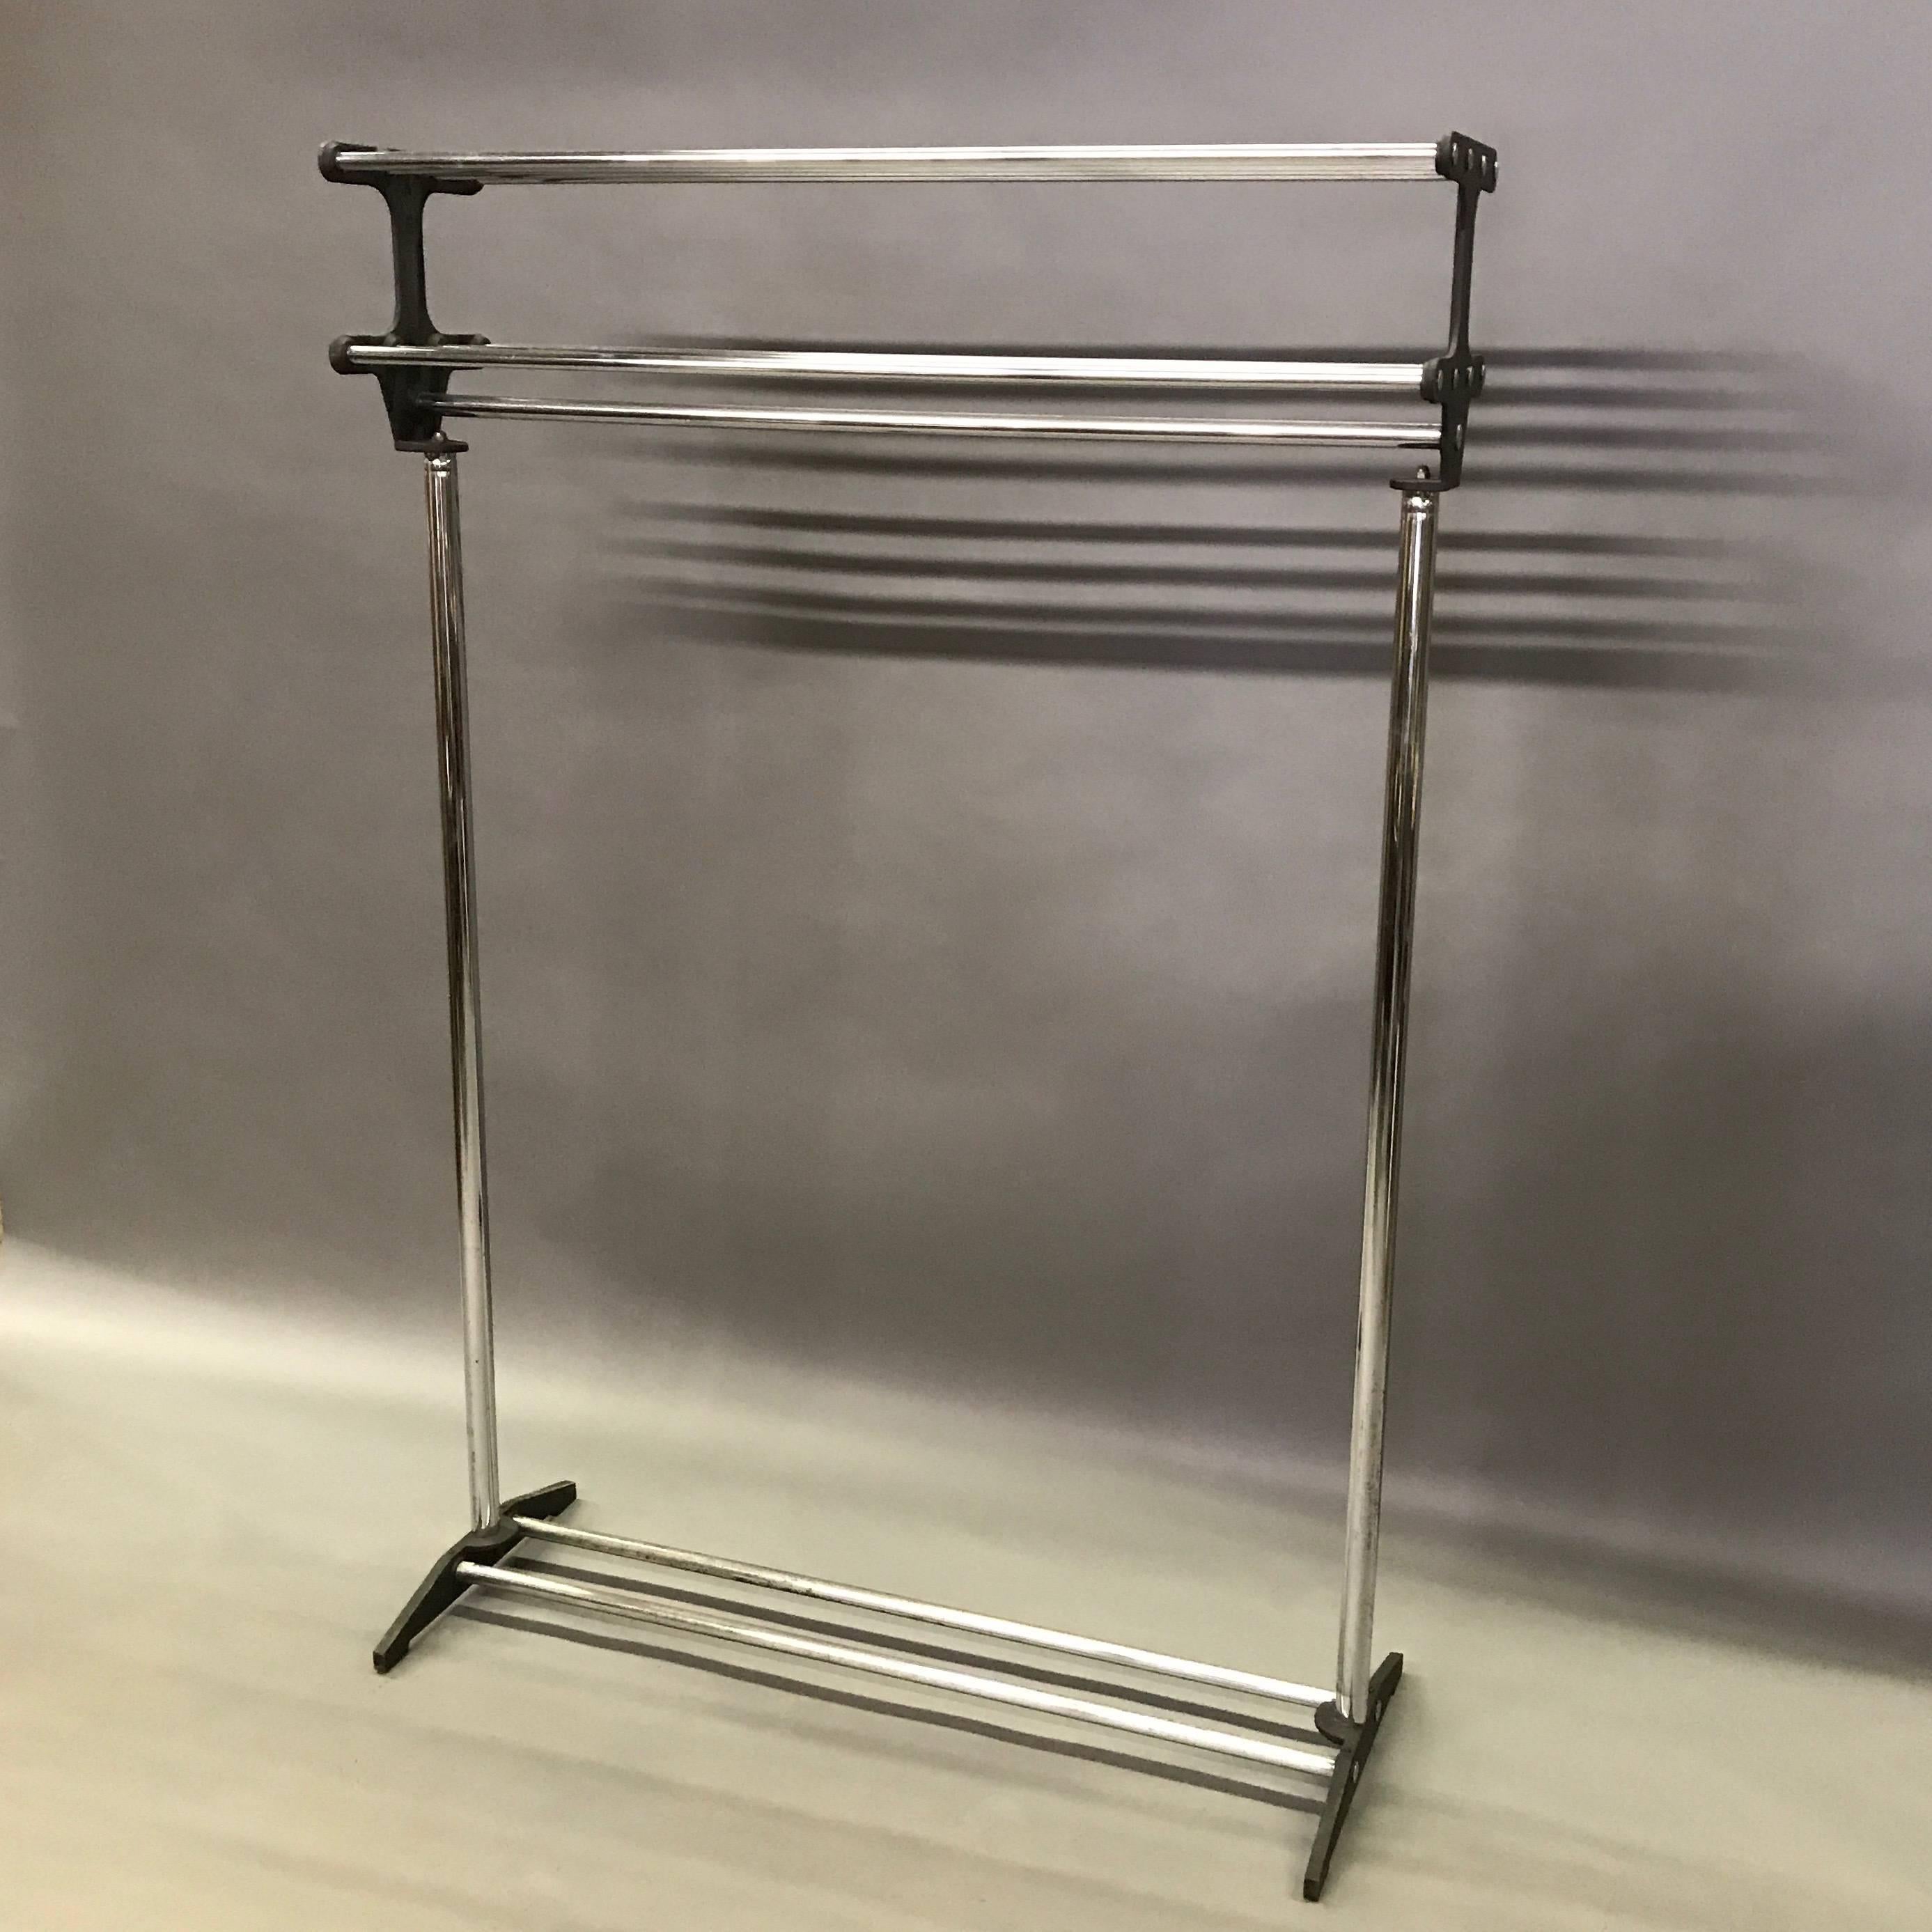 Mid-20th century, Art Deco style, streamlined, tubular chrome and painted steel coat rack features double-barred coat hanging with slatted chrome shelving above for bags and hats. The first shelf is 64